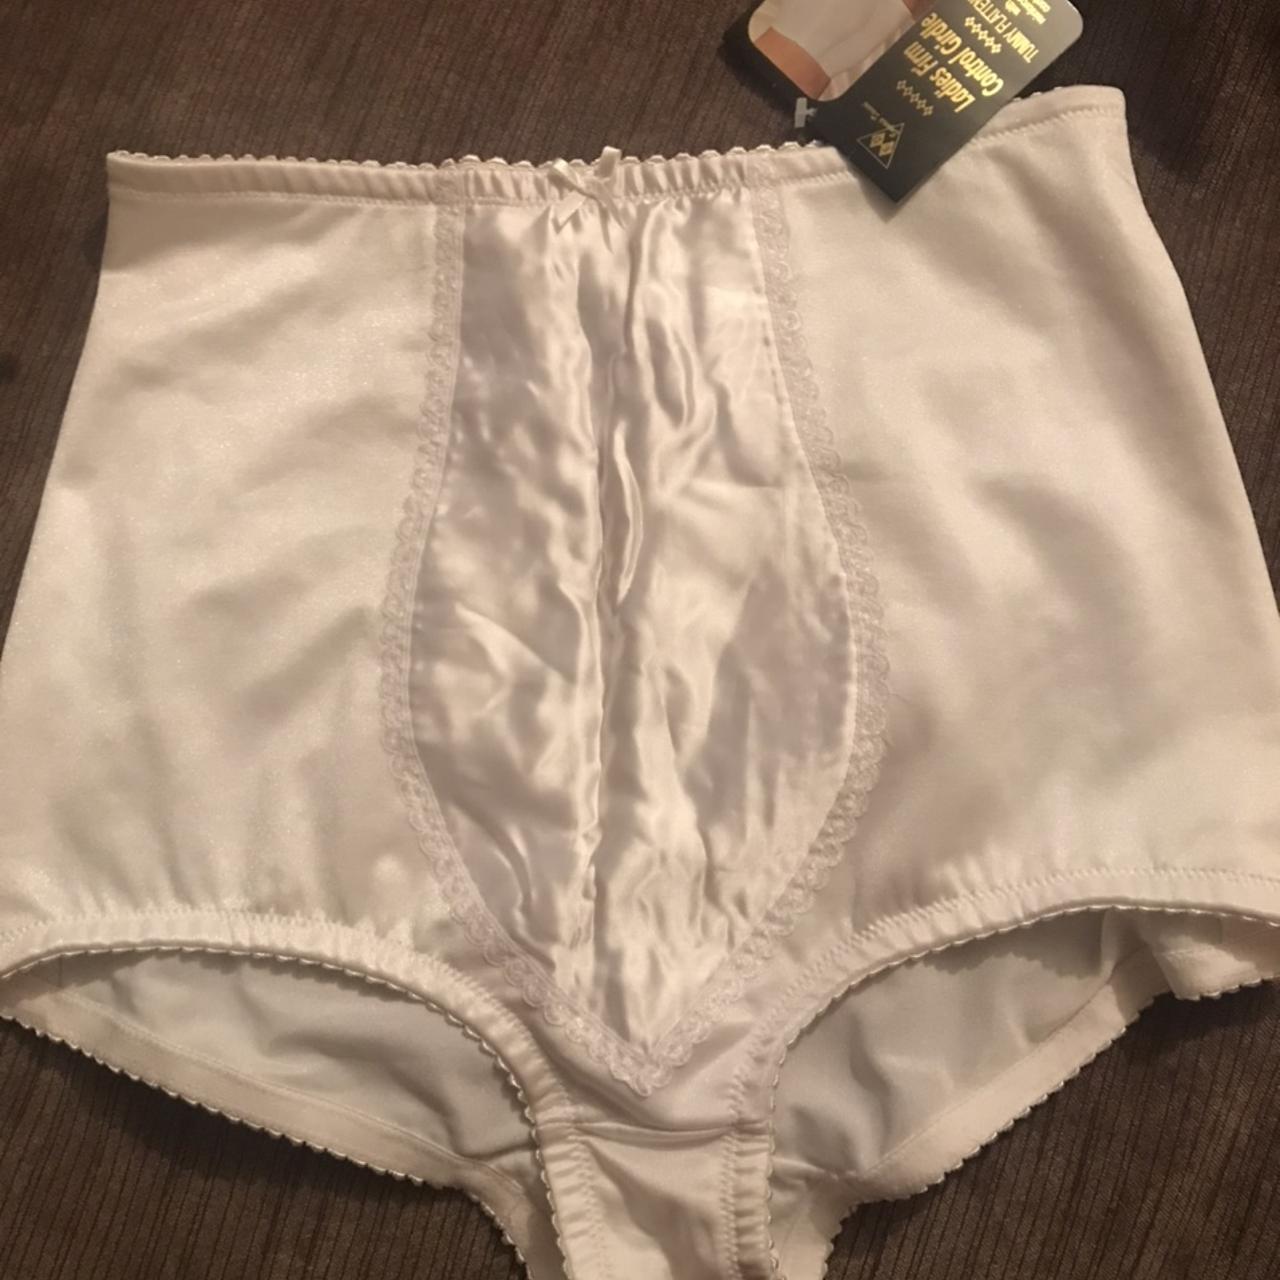 NEW WITH TAGS 🏷 White Firm Control Girdle with... - Depop